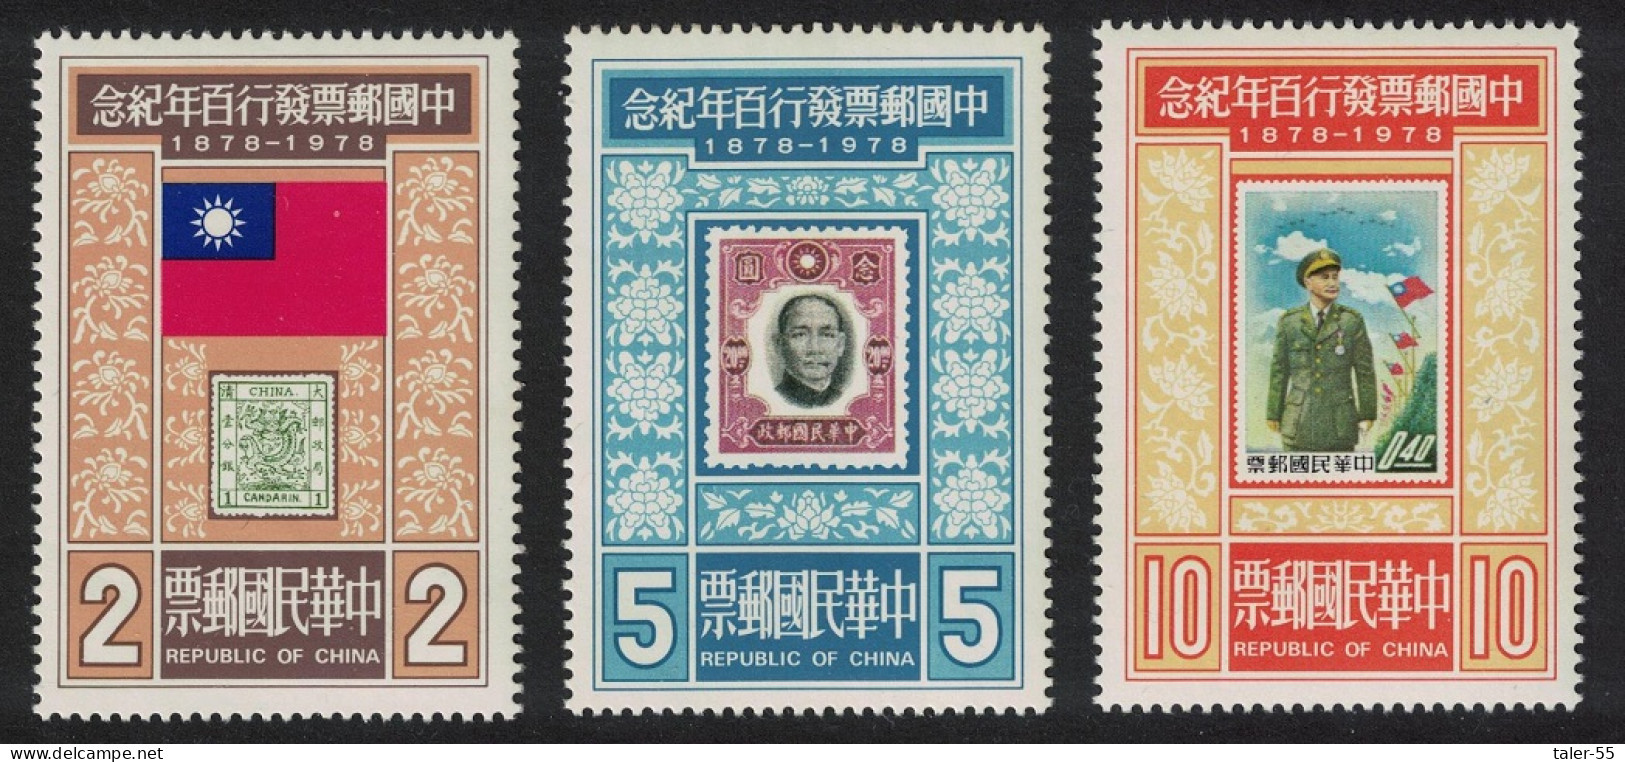 Taiwan Centenary Of Chinese Postage Stamp 3v 1978 MNH SG#1188-1190 - Unused Stamps